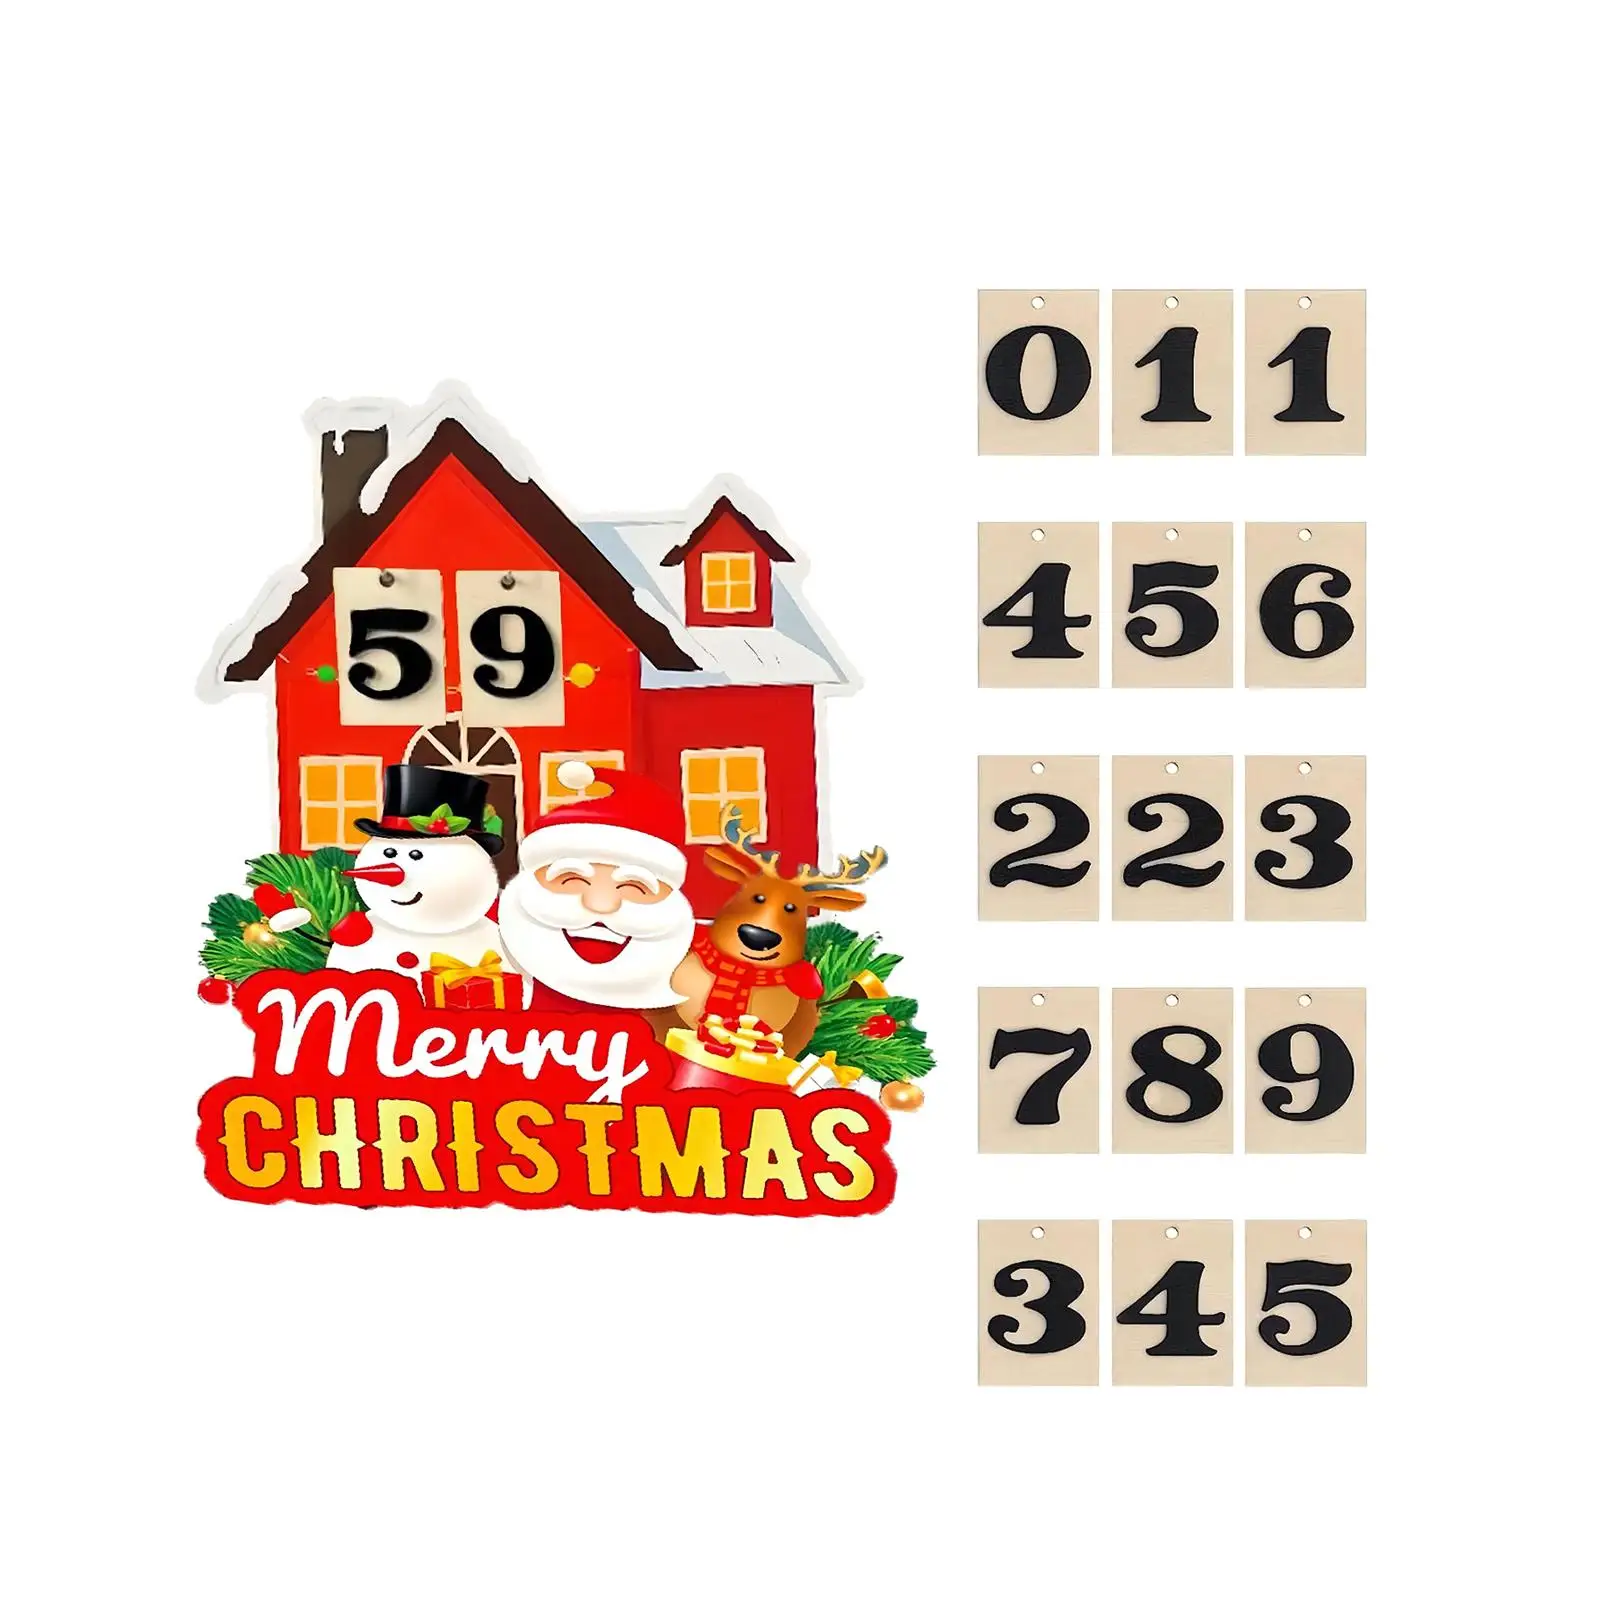 Christmas Advent Calendar Practical Lovely Holiday Gifts Home Ornaments Crafts for Outdoor Classroom Desk Bedroom Fireplace